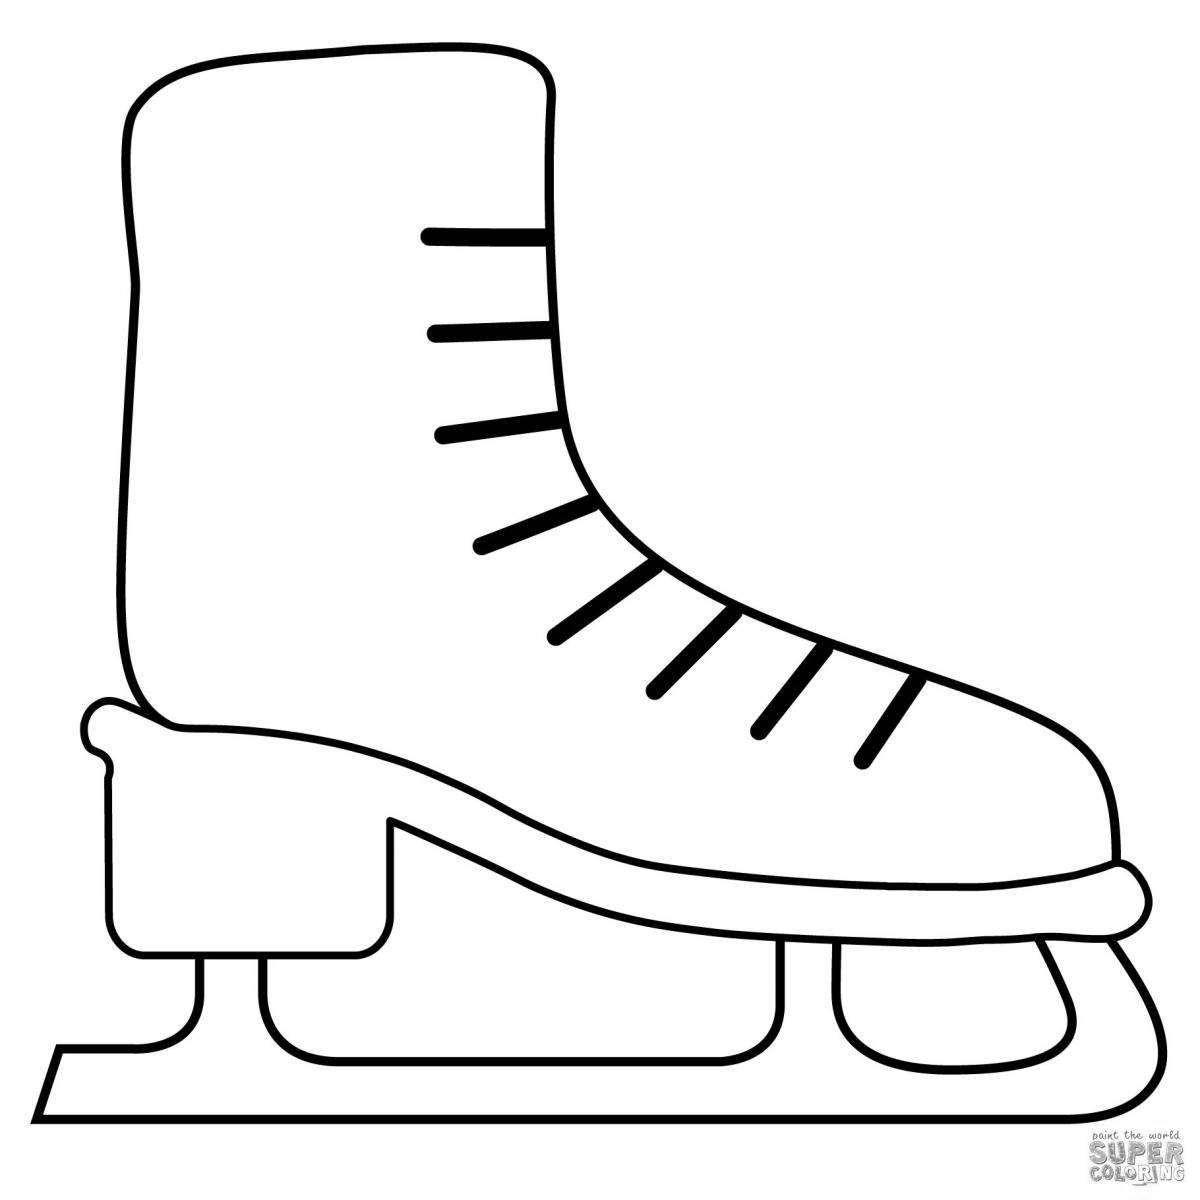 Glorious skates coloring for children 5-6 years old